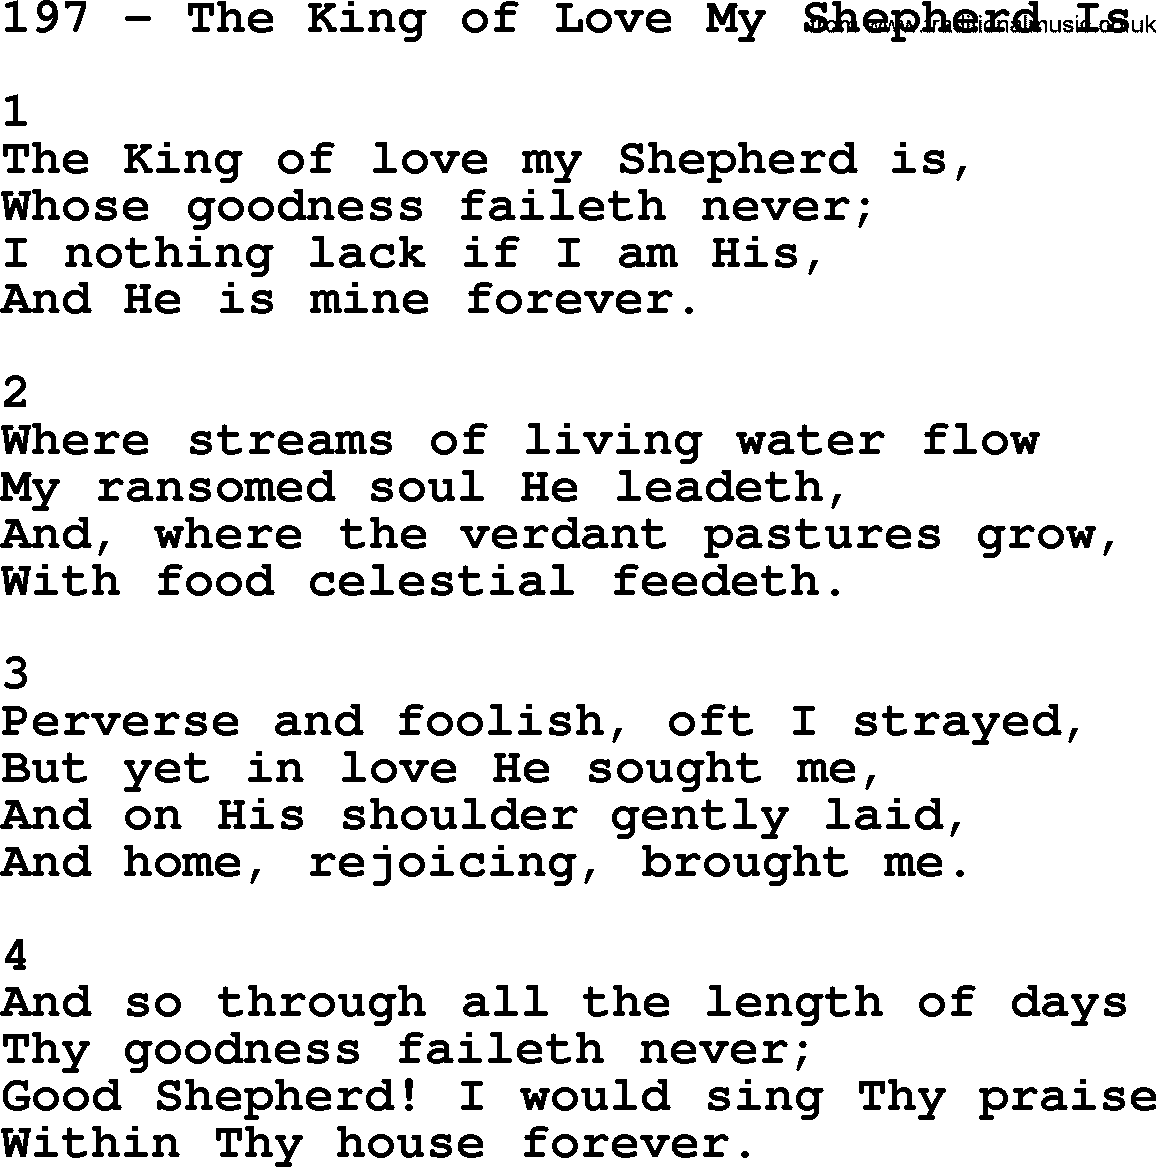 Complete Adventis Hymnal, title: 197-The King Of Love My Shepherd Is, with lyrics, midi, mp3, powerpoints(PPT) and PDF,